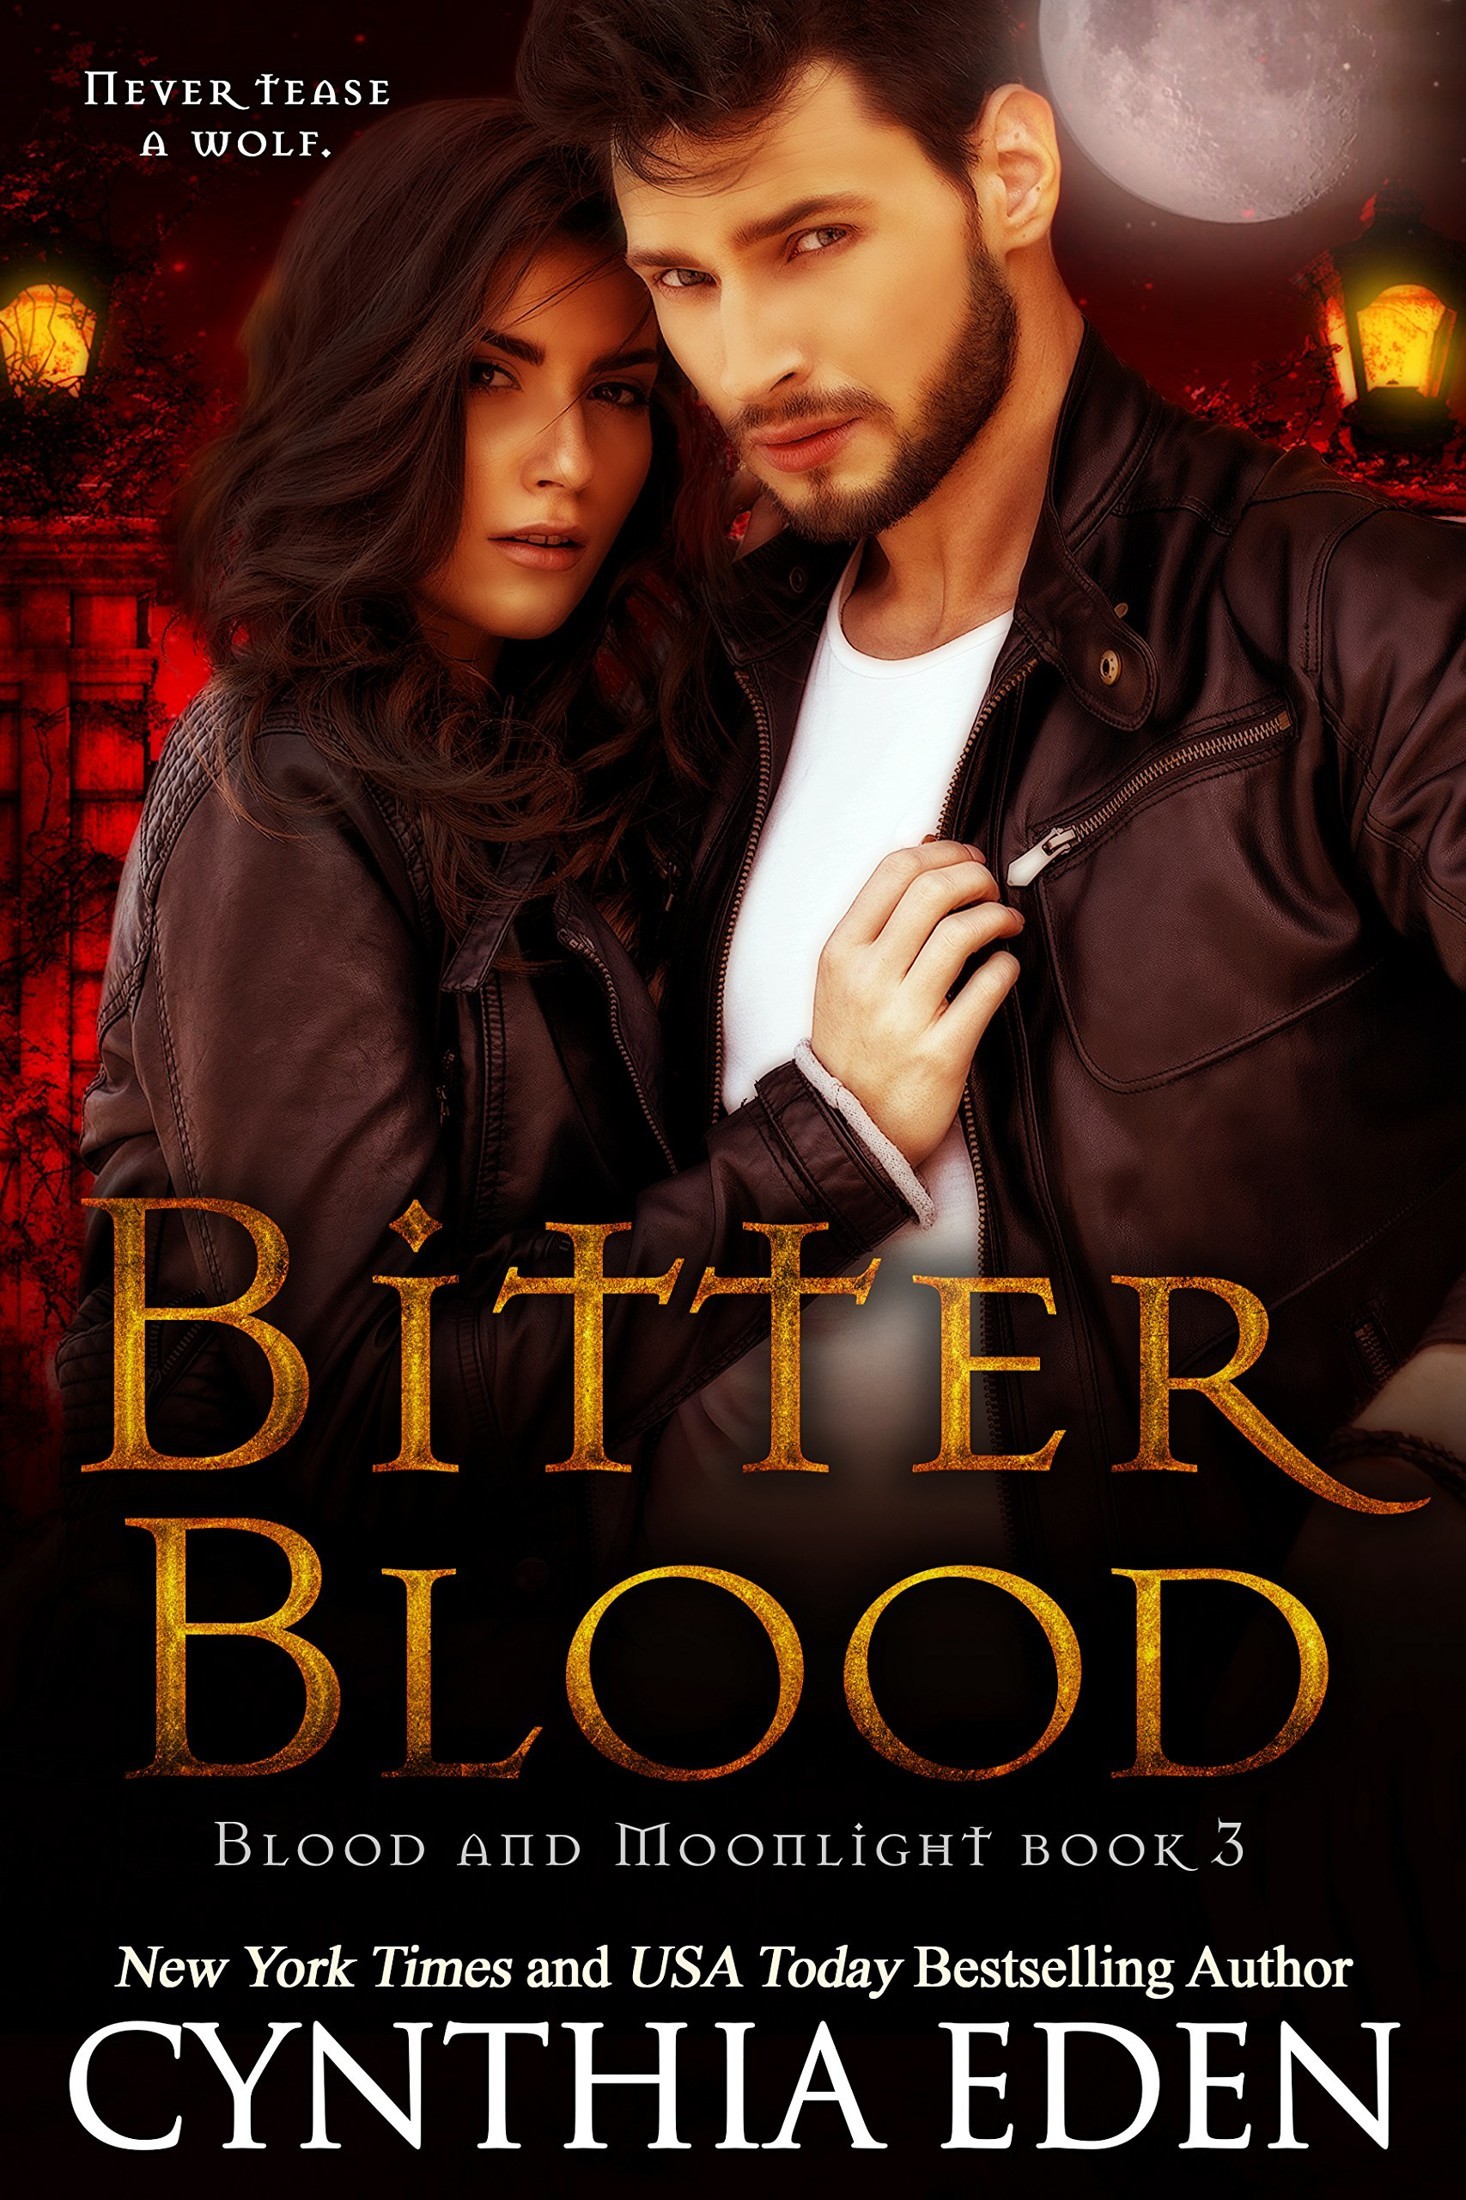 Bitter Blood (Blood and Moonlight Book 3) by Cynthia Eden